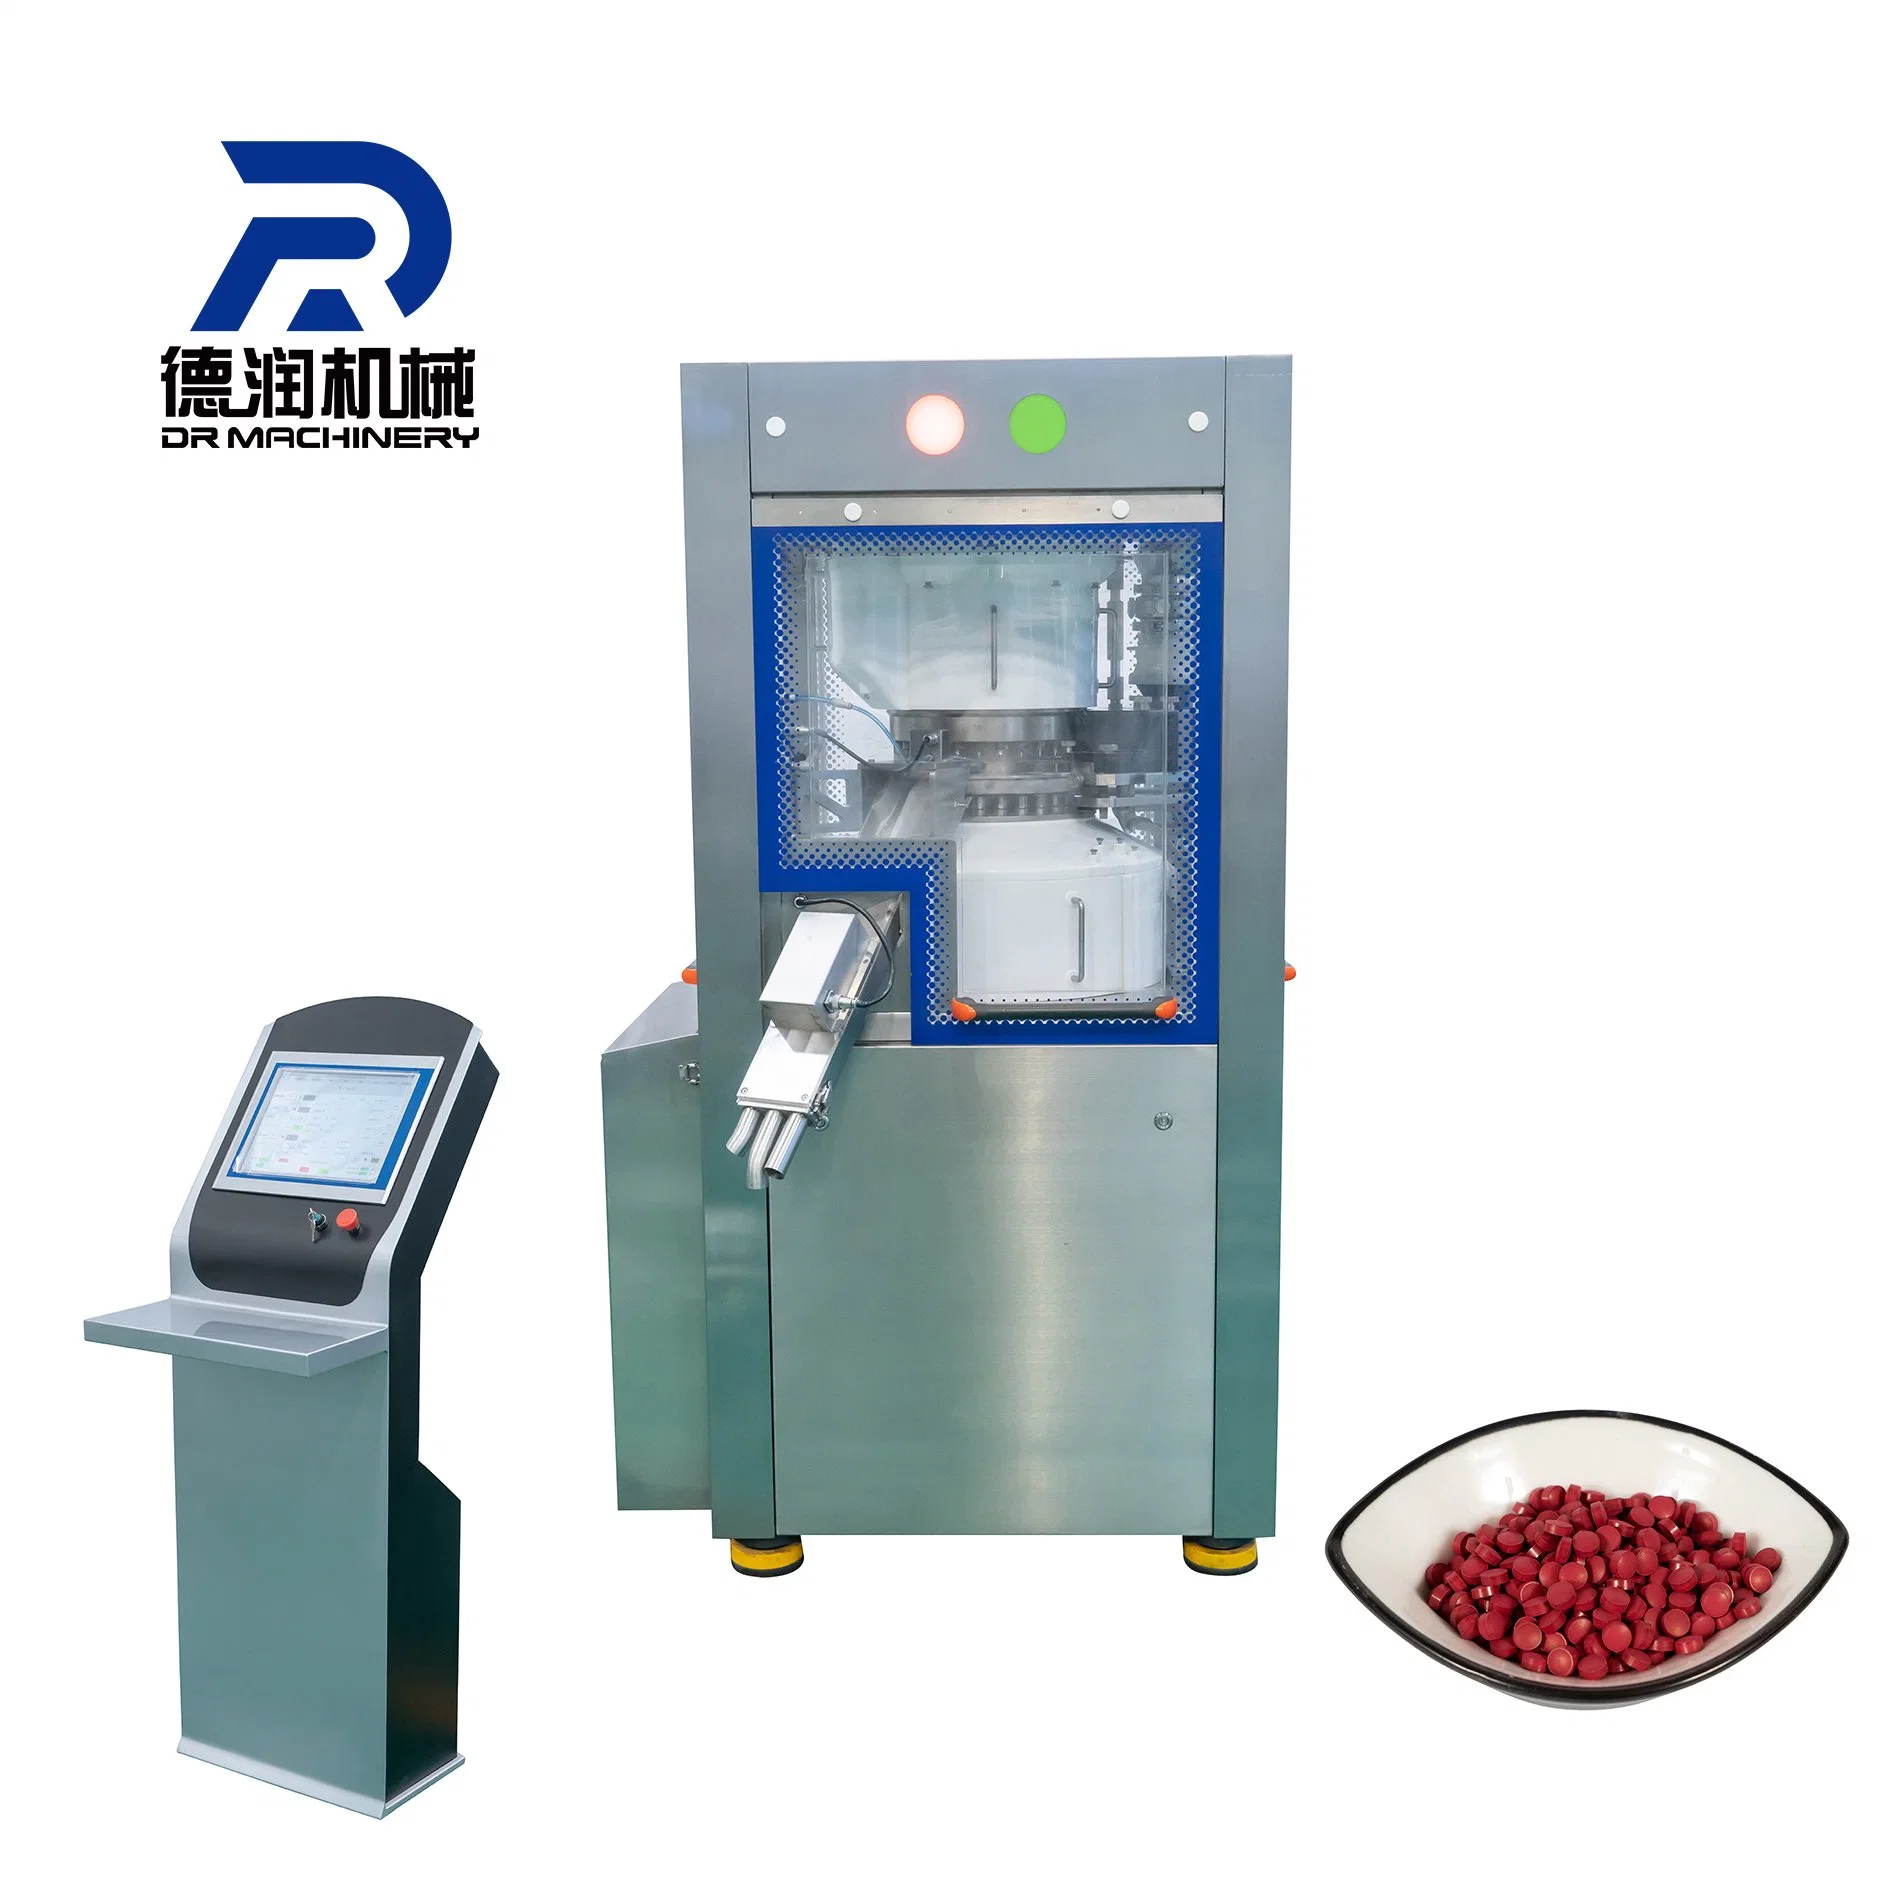 Gzp300 High-Speed Rotary Tablet Press Machine with Pre-Pressure Function Automatic High Quality High Speed Rotary Tablet Press Machine